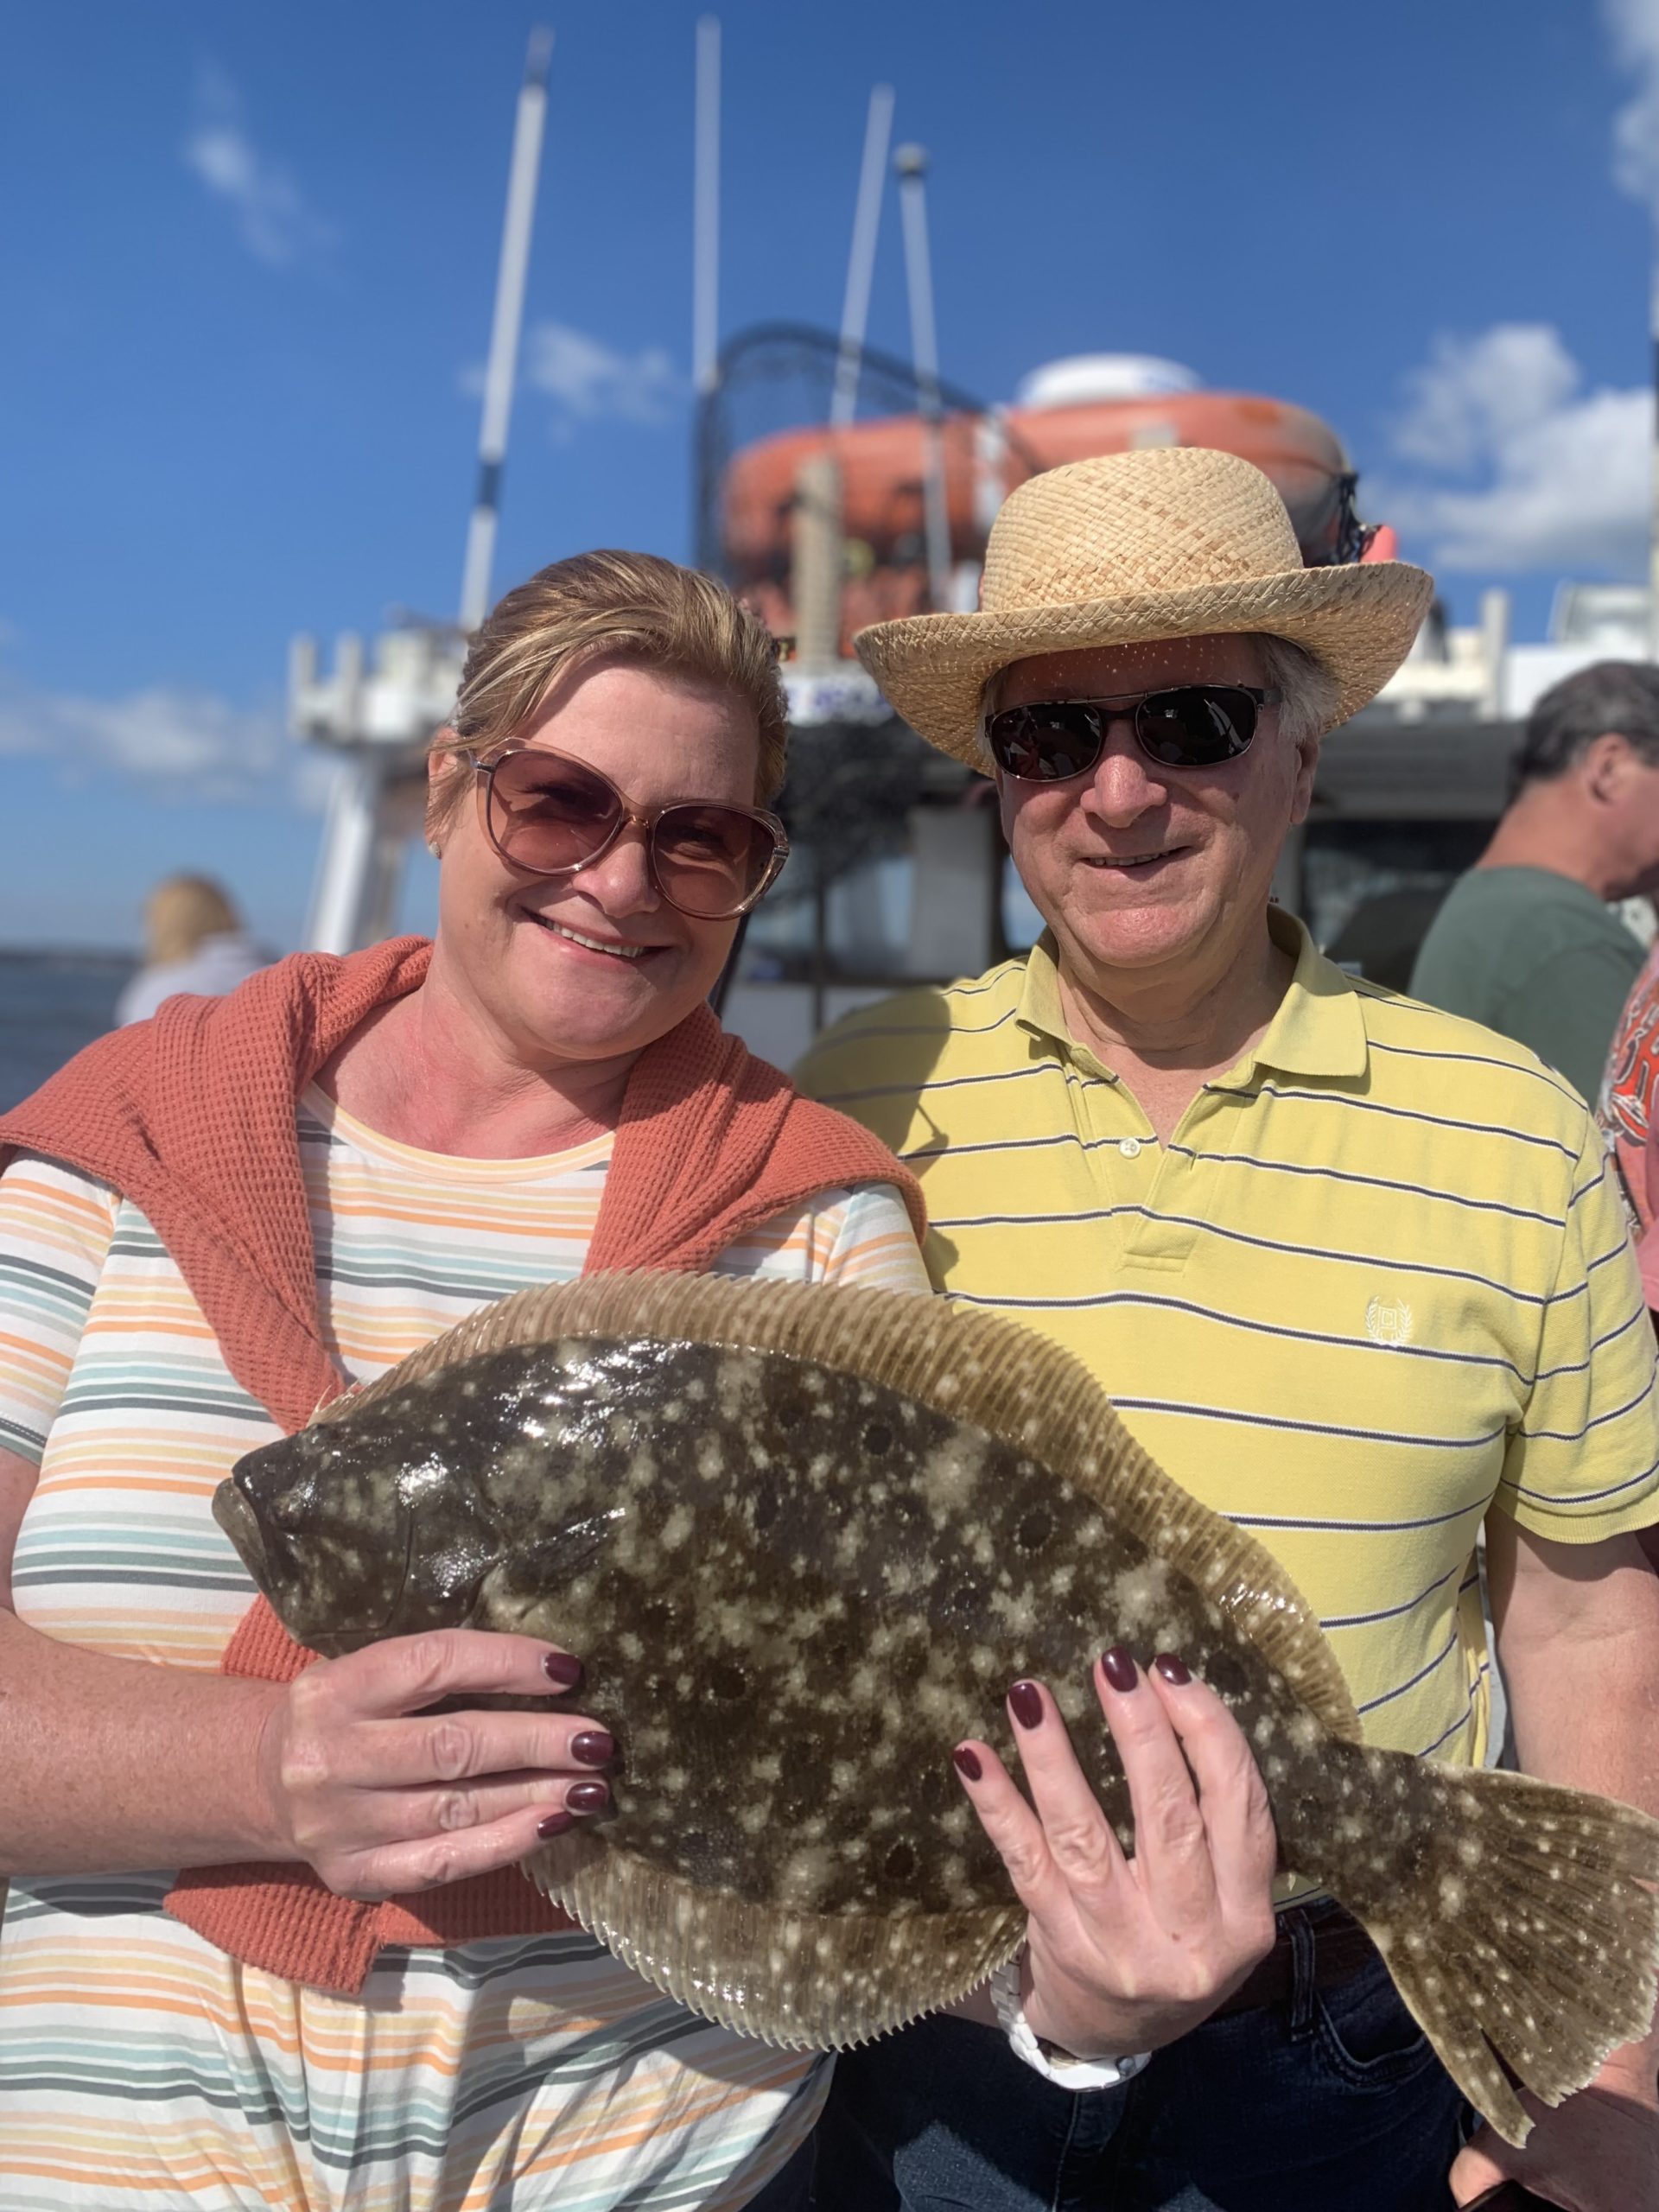 Ken and Kerry won the summer's best dressed award aboard the Shinnecock Star party boat out of Hampton Bays, and decked a few fluke too.